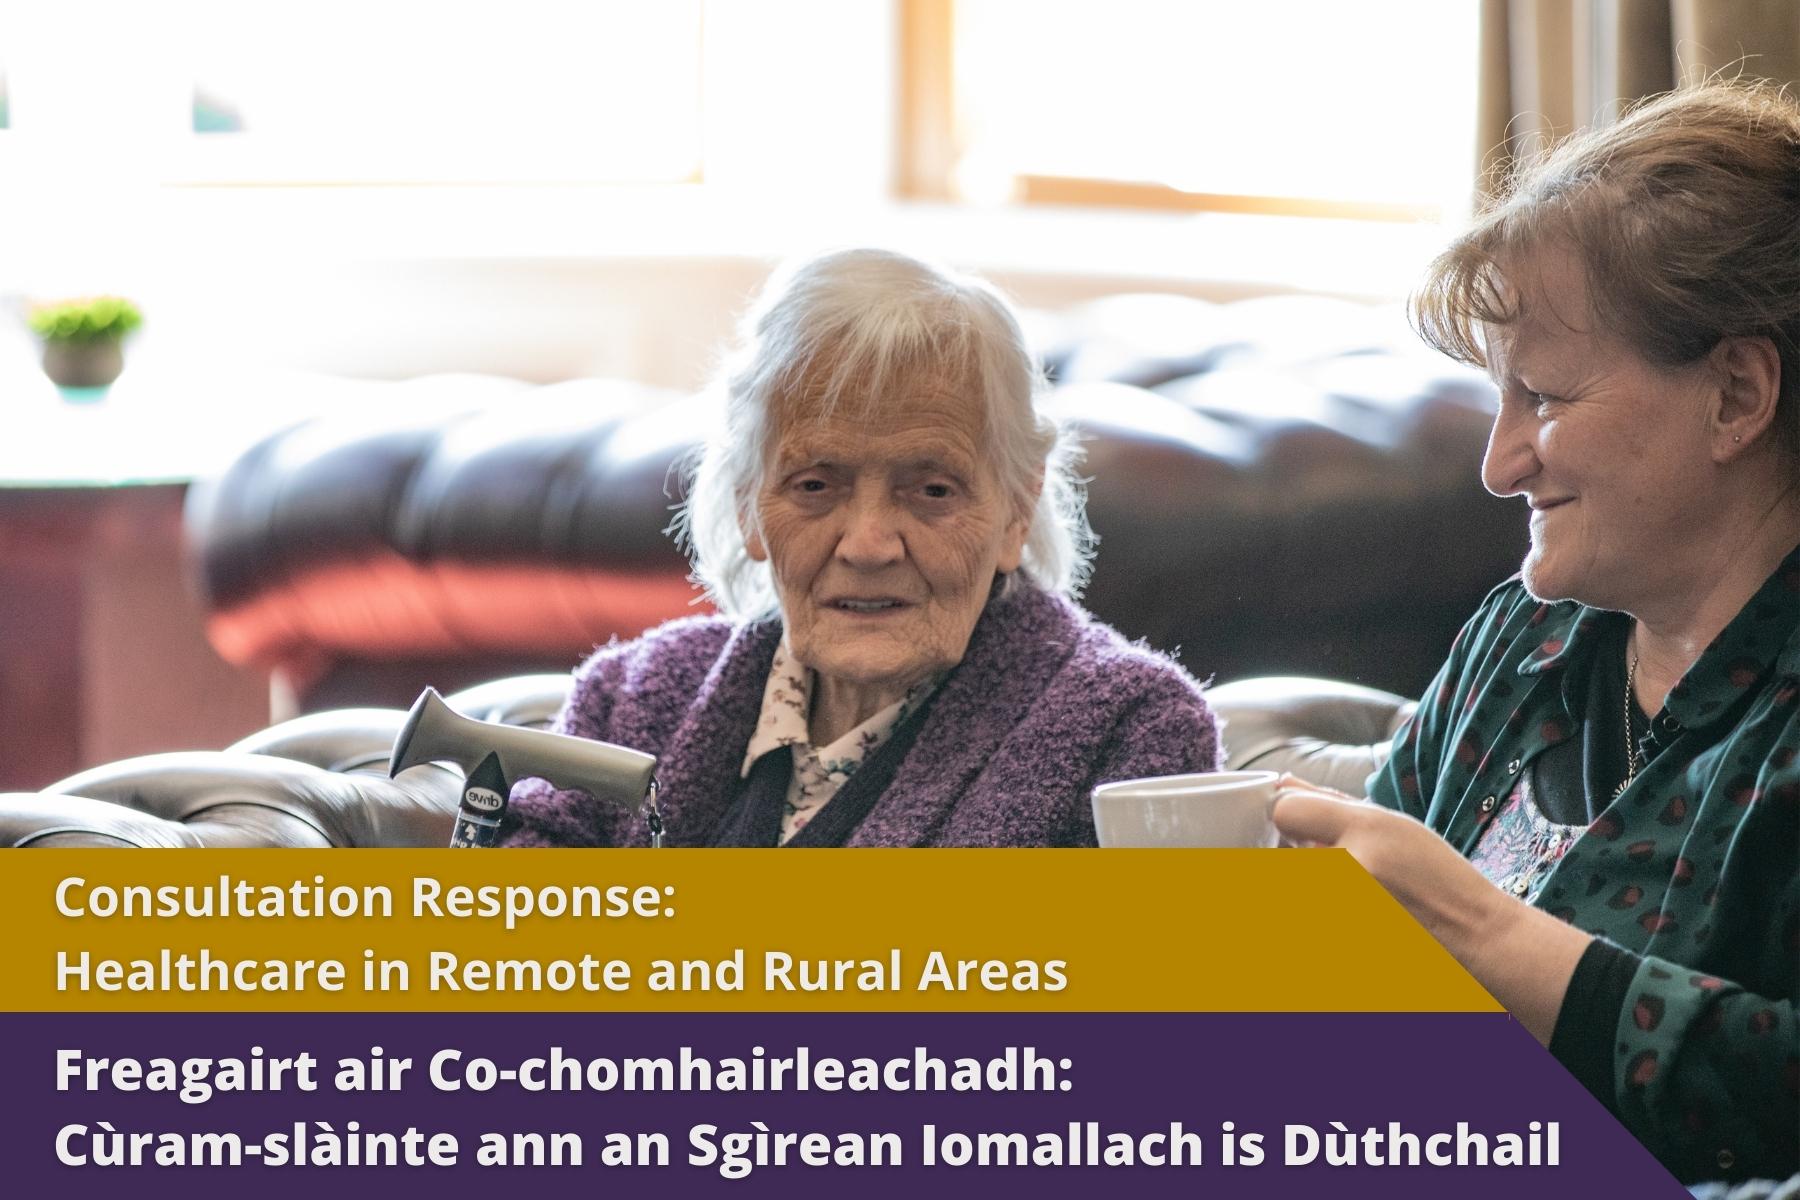 Consultation Response: Healthcare in Remote and Rural Areas